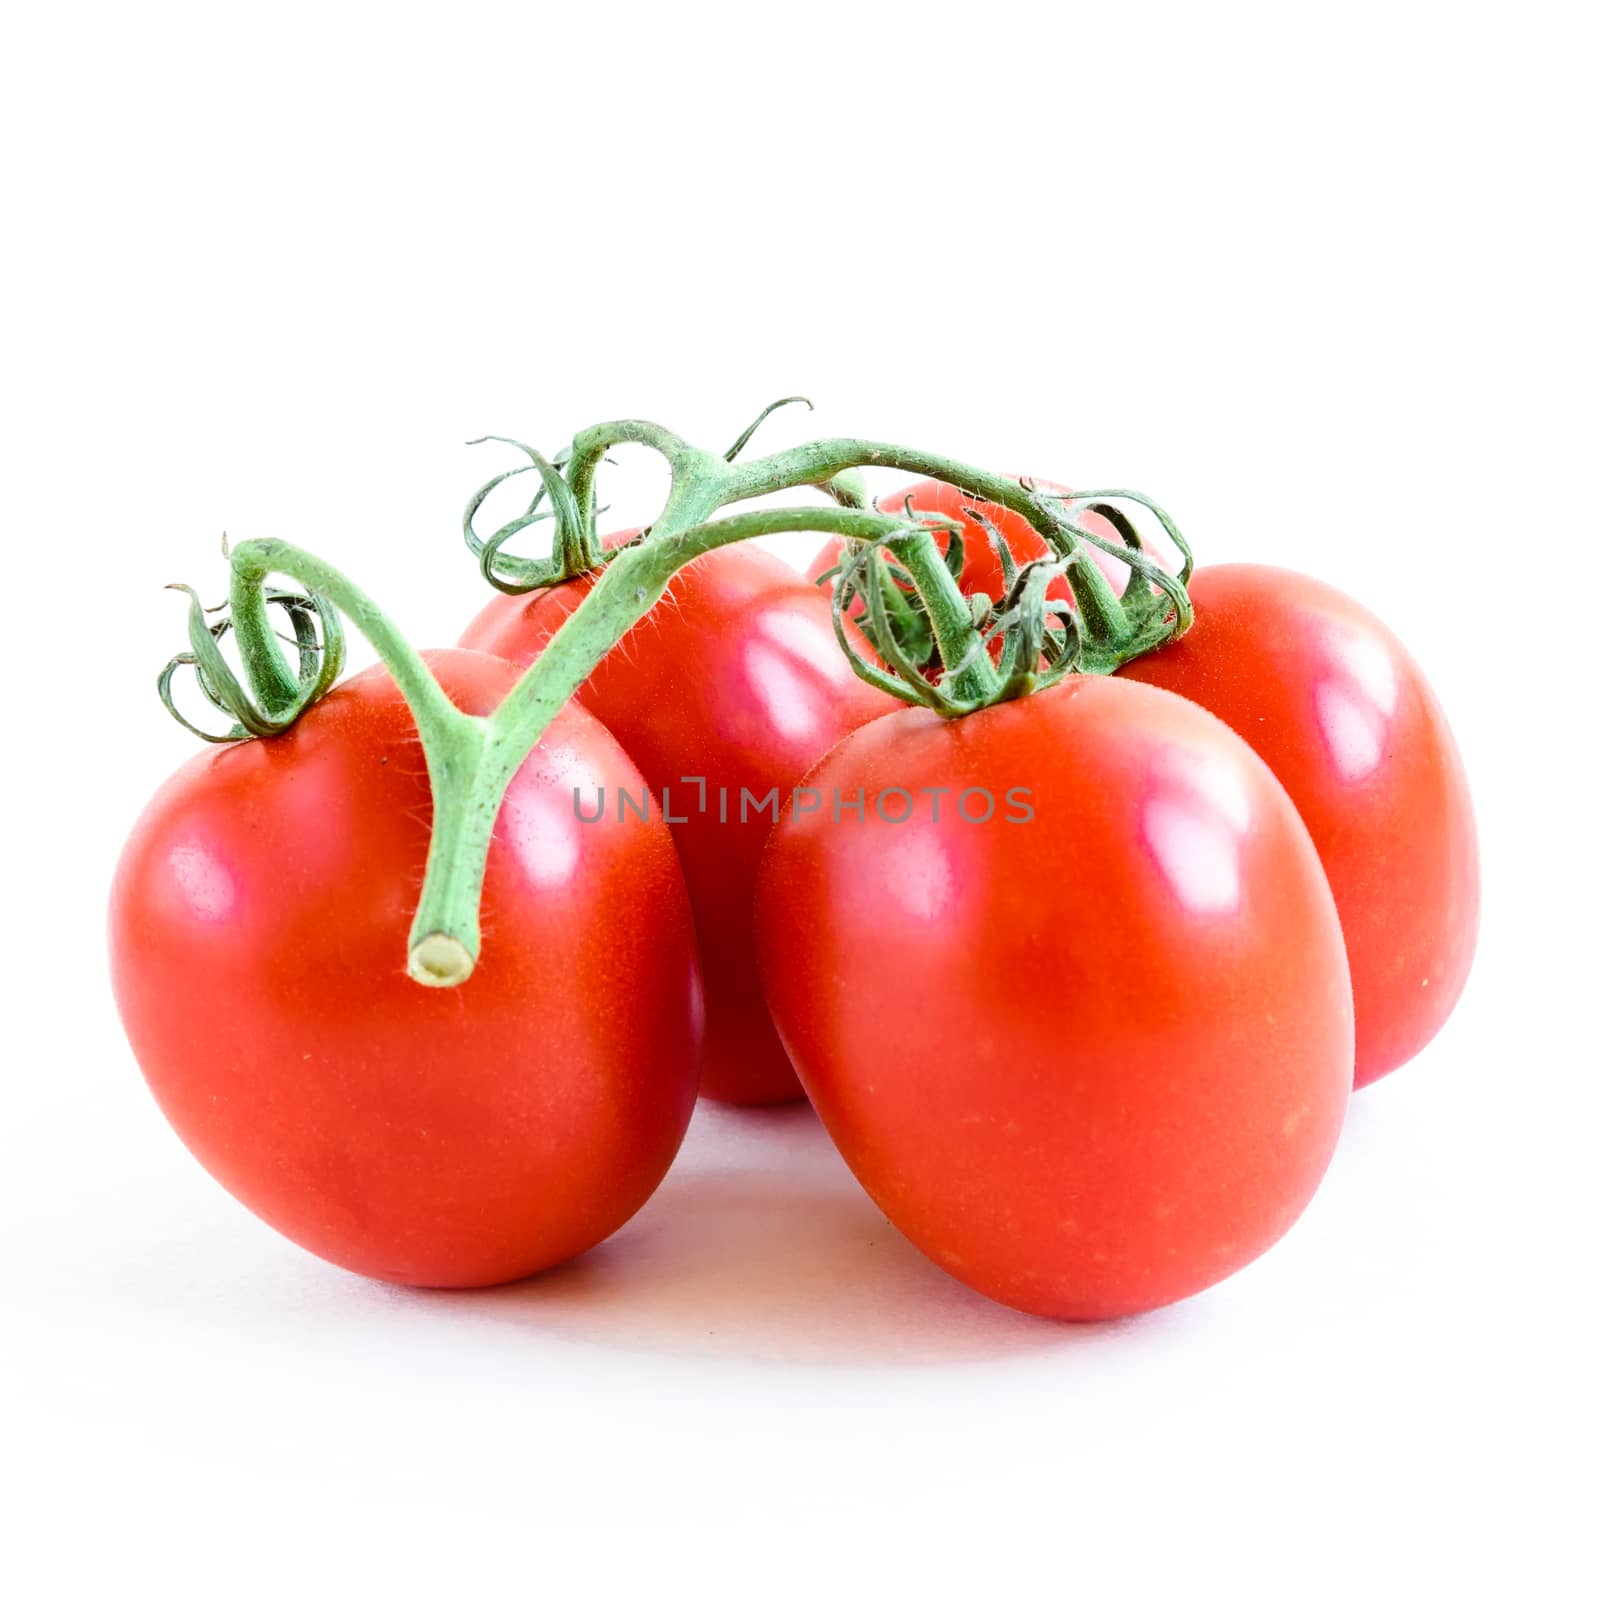 Four on the vine Roma tomatoes isolated on white background. Cluster of vine ripened fruits still attached to the stems. Organic tomatoes with clipping path and copy space